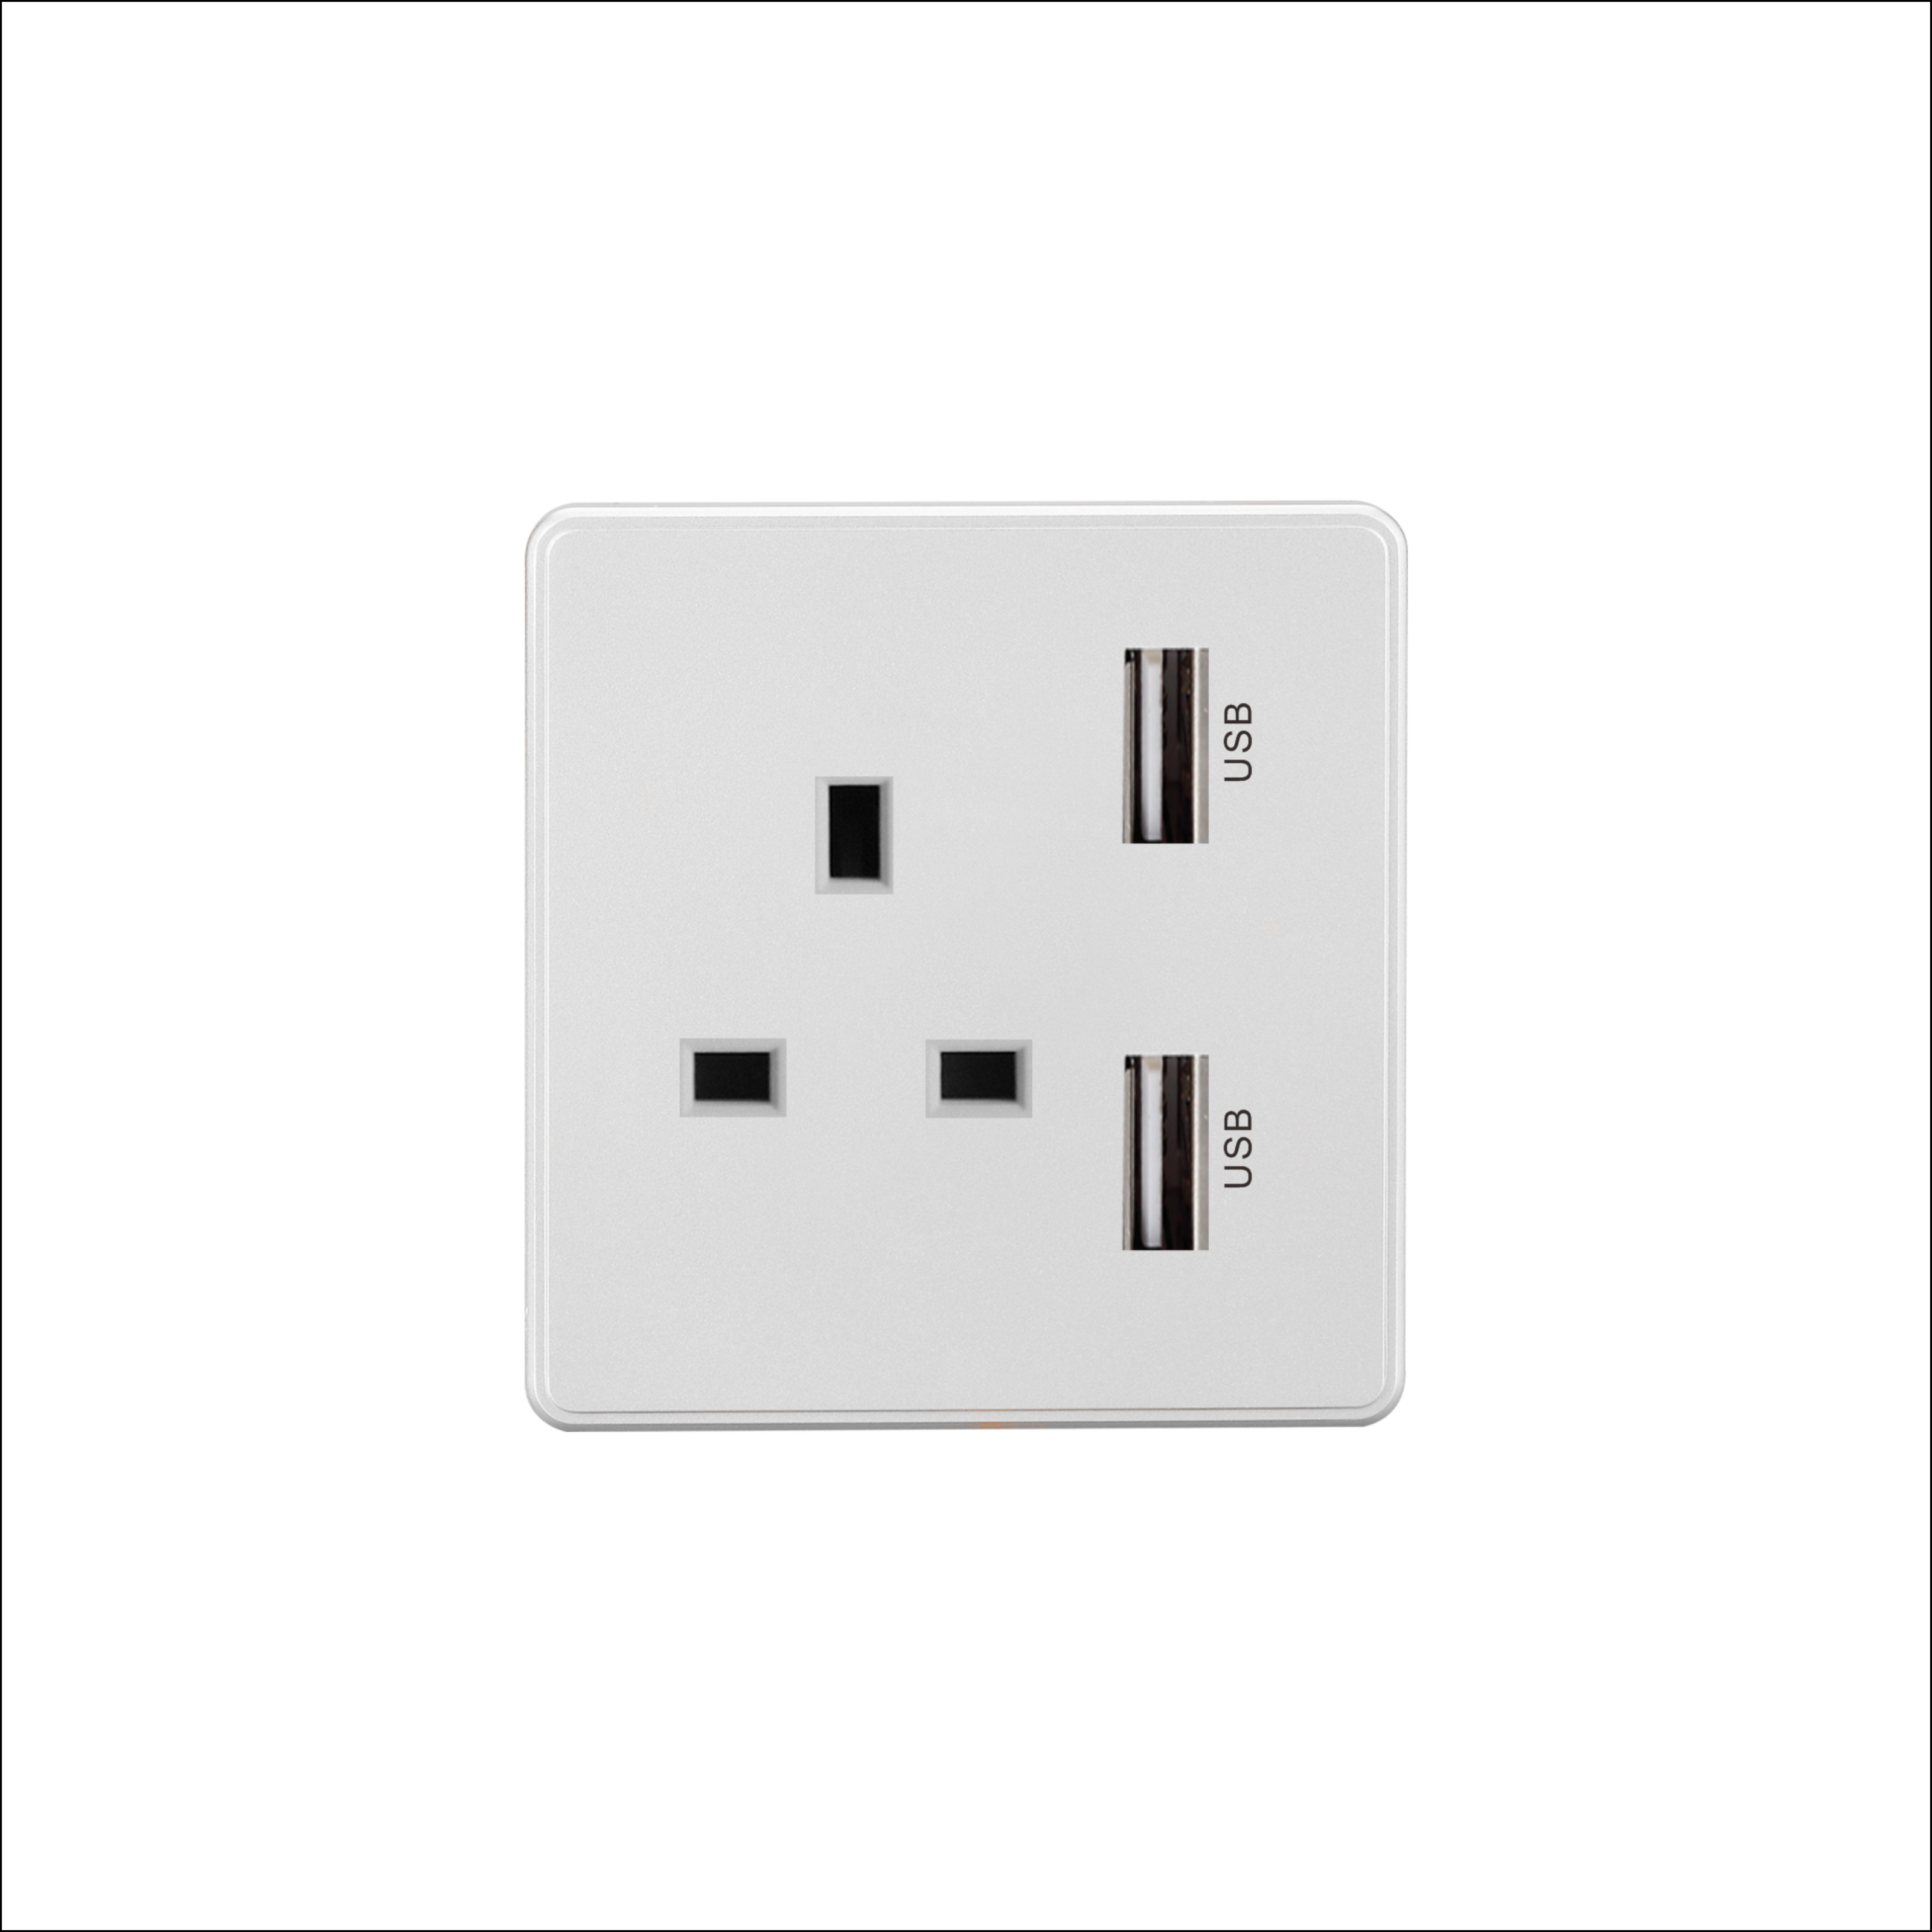 3 Pin with 2USB socket Featured Image